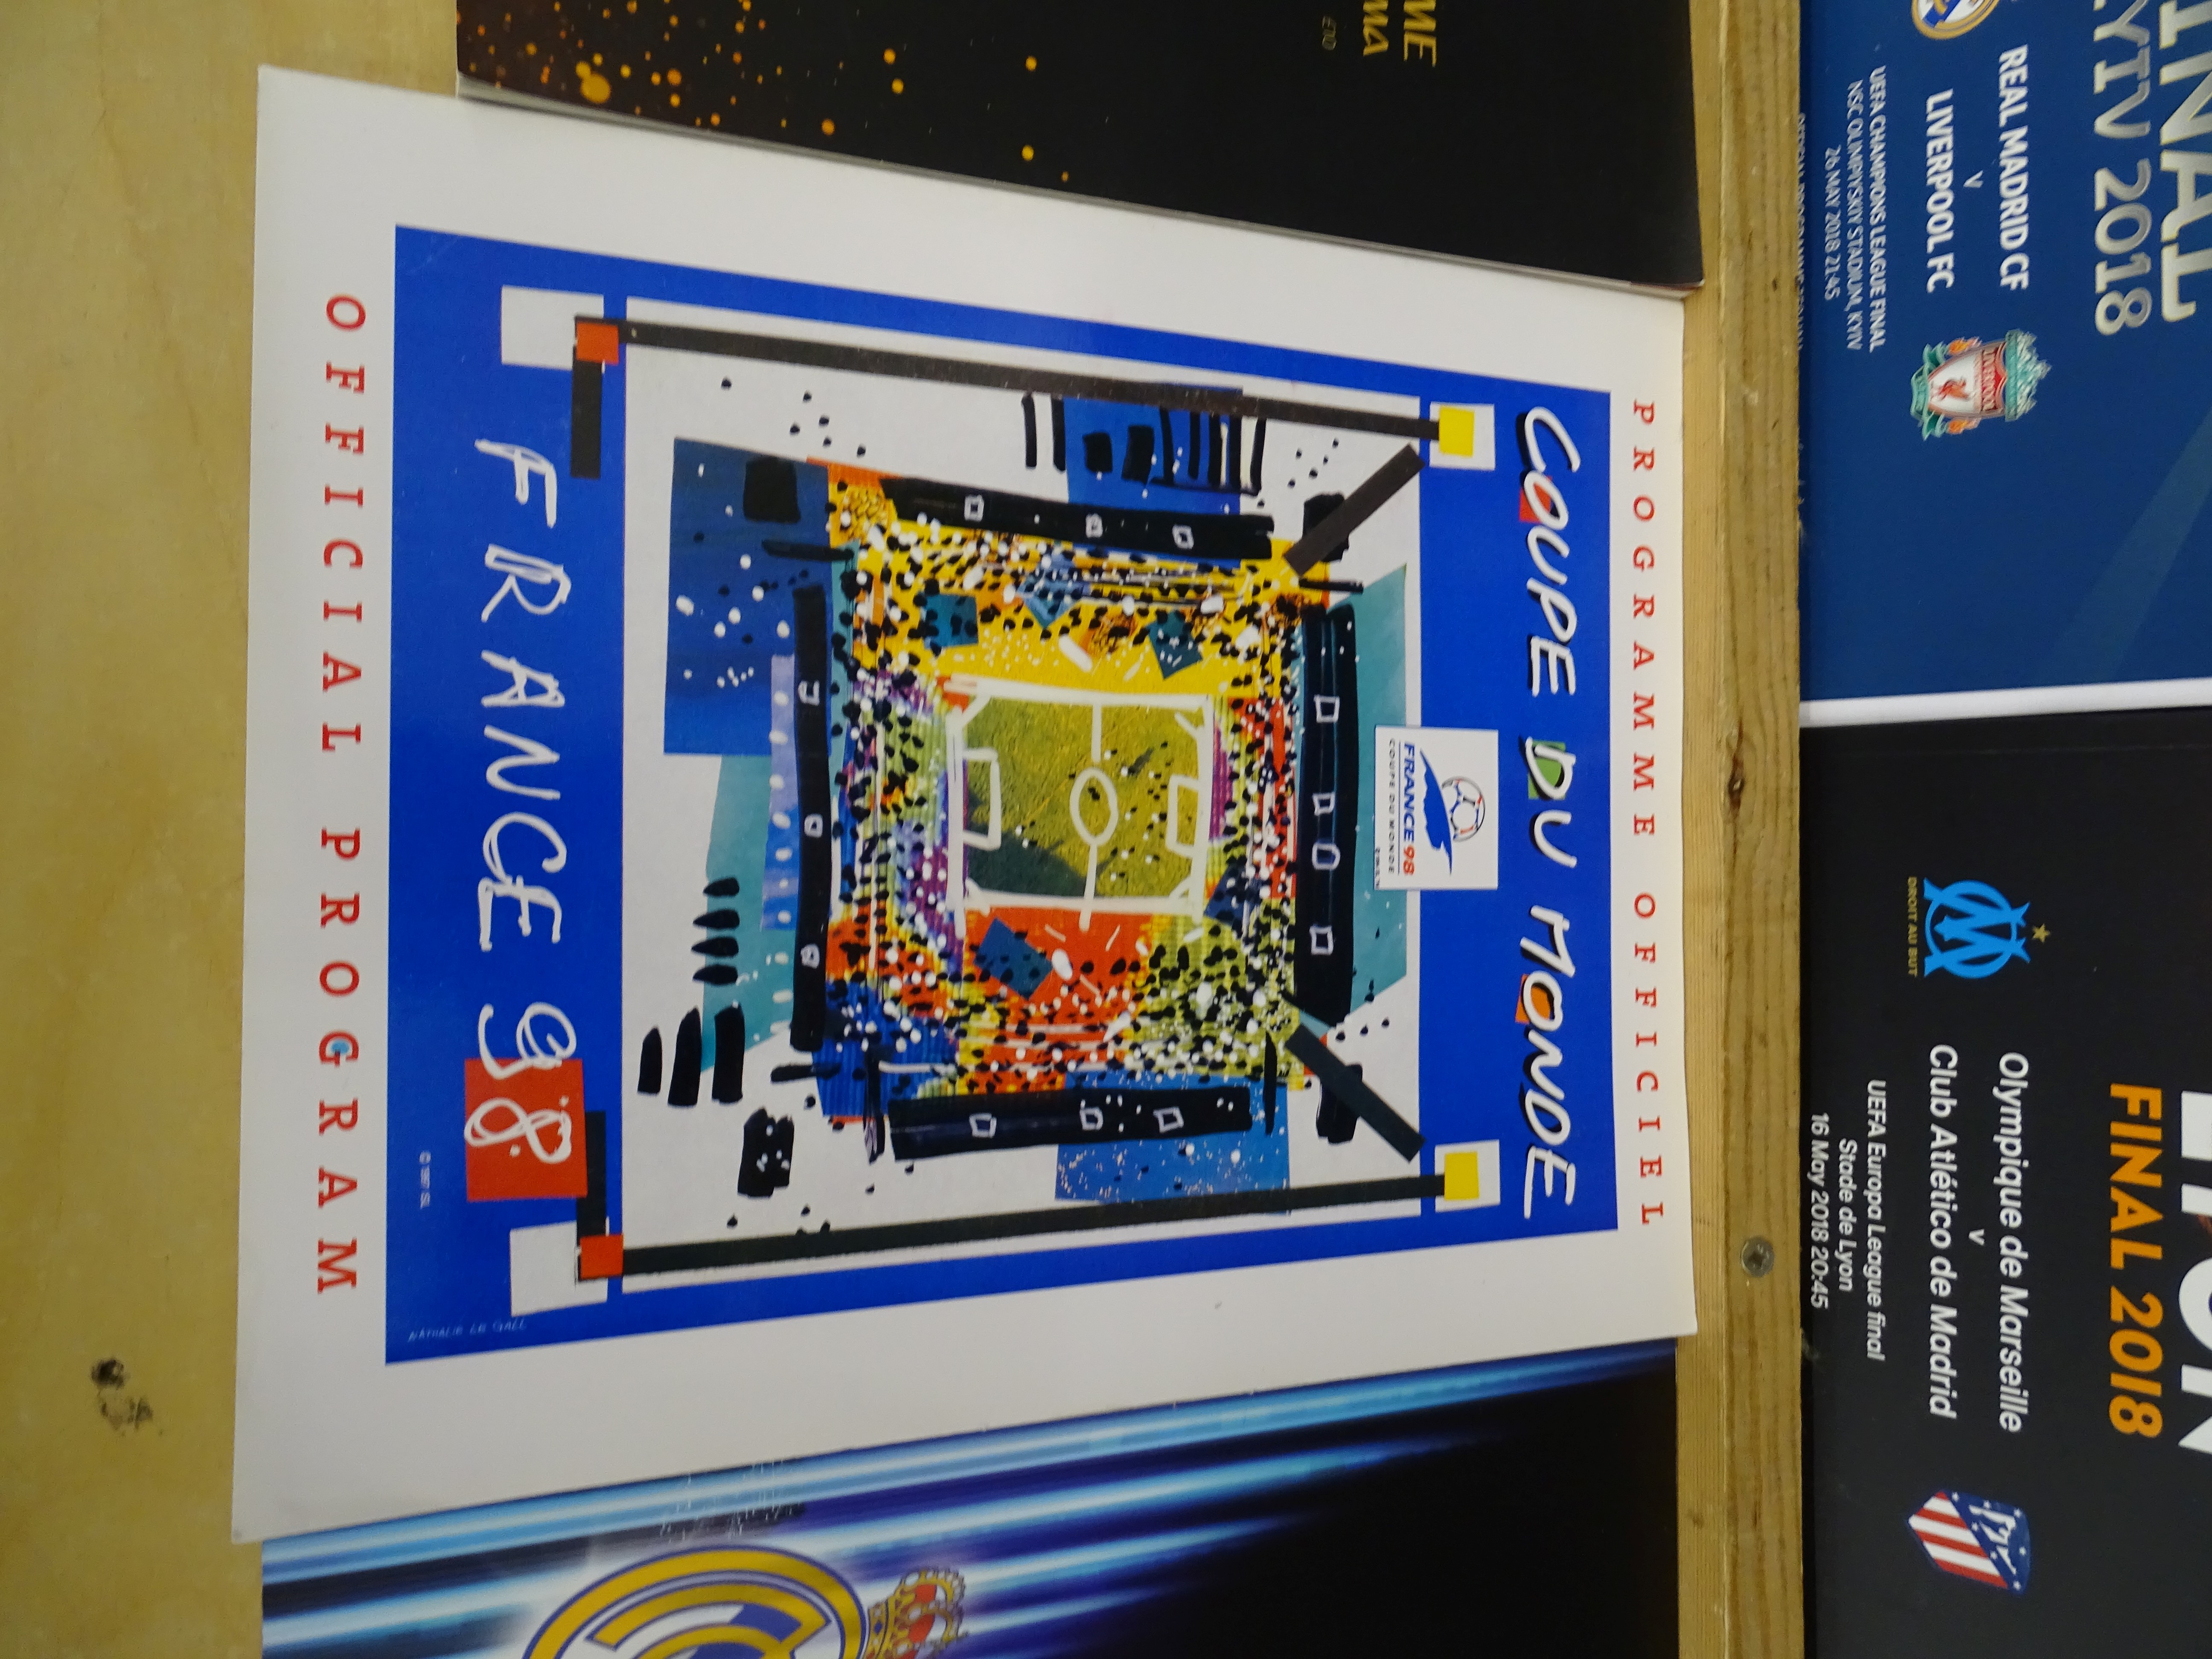 5 Football programs to include World Cup France 98 and UEFA Champions League final etc - Image 5 of 6